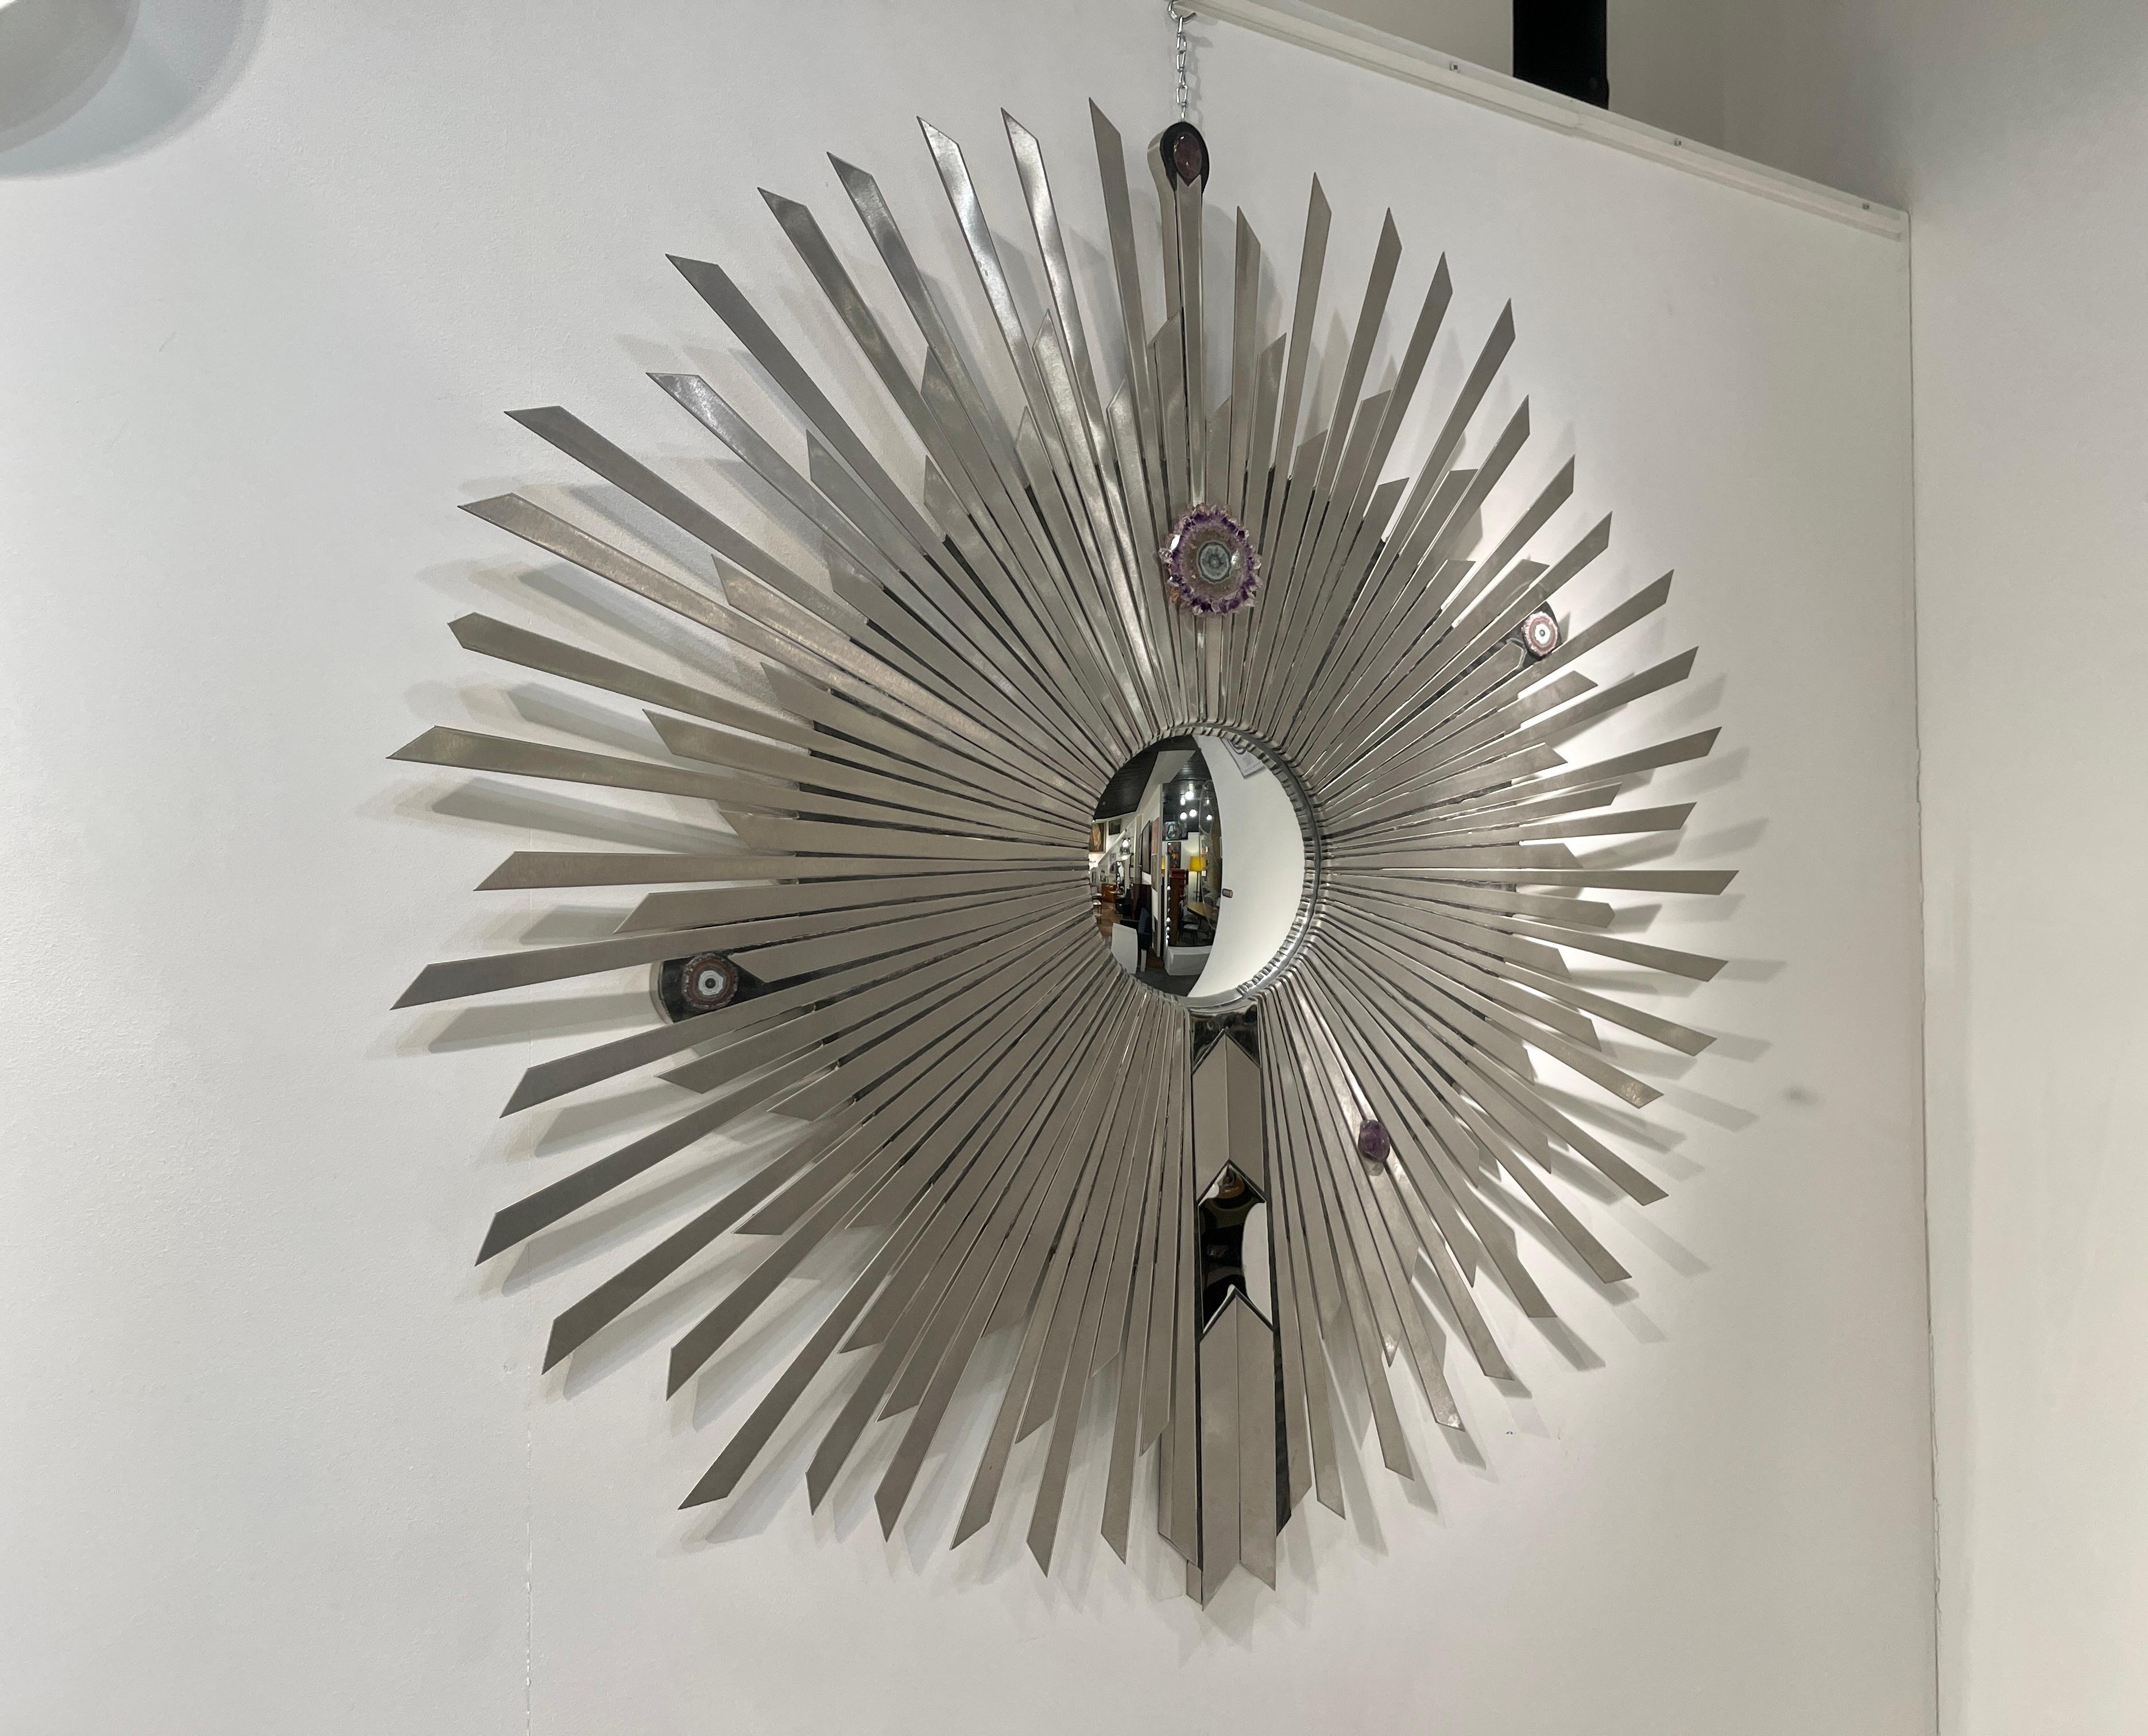 Created to measure by Stan Usel, this original Sun mirror with a convex glass in stainless steel are inserted with original Gemstones and agate stones. Exceptional craftsmanship with the art of tailor made furniture. This original and unique piece